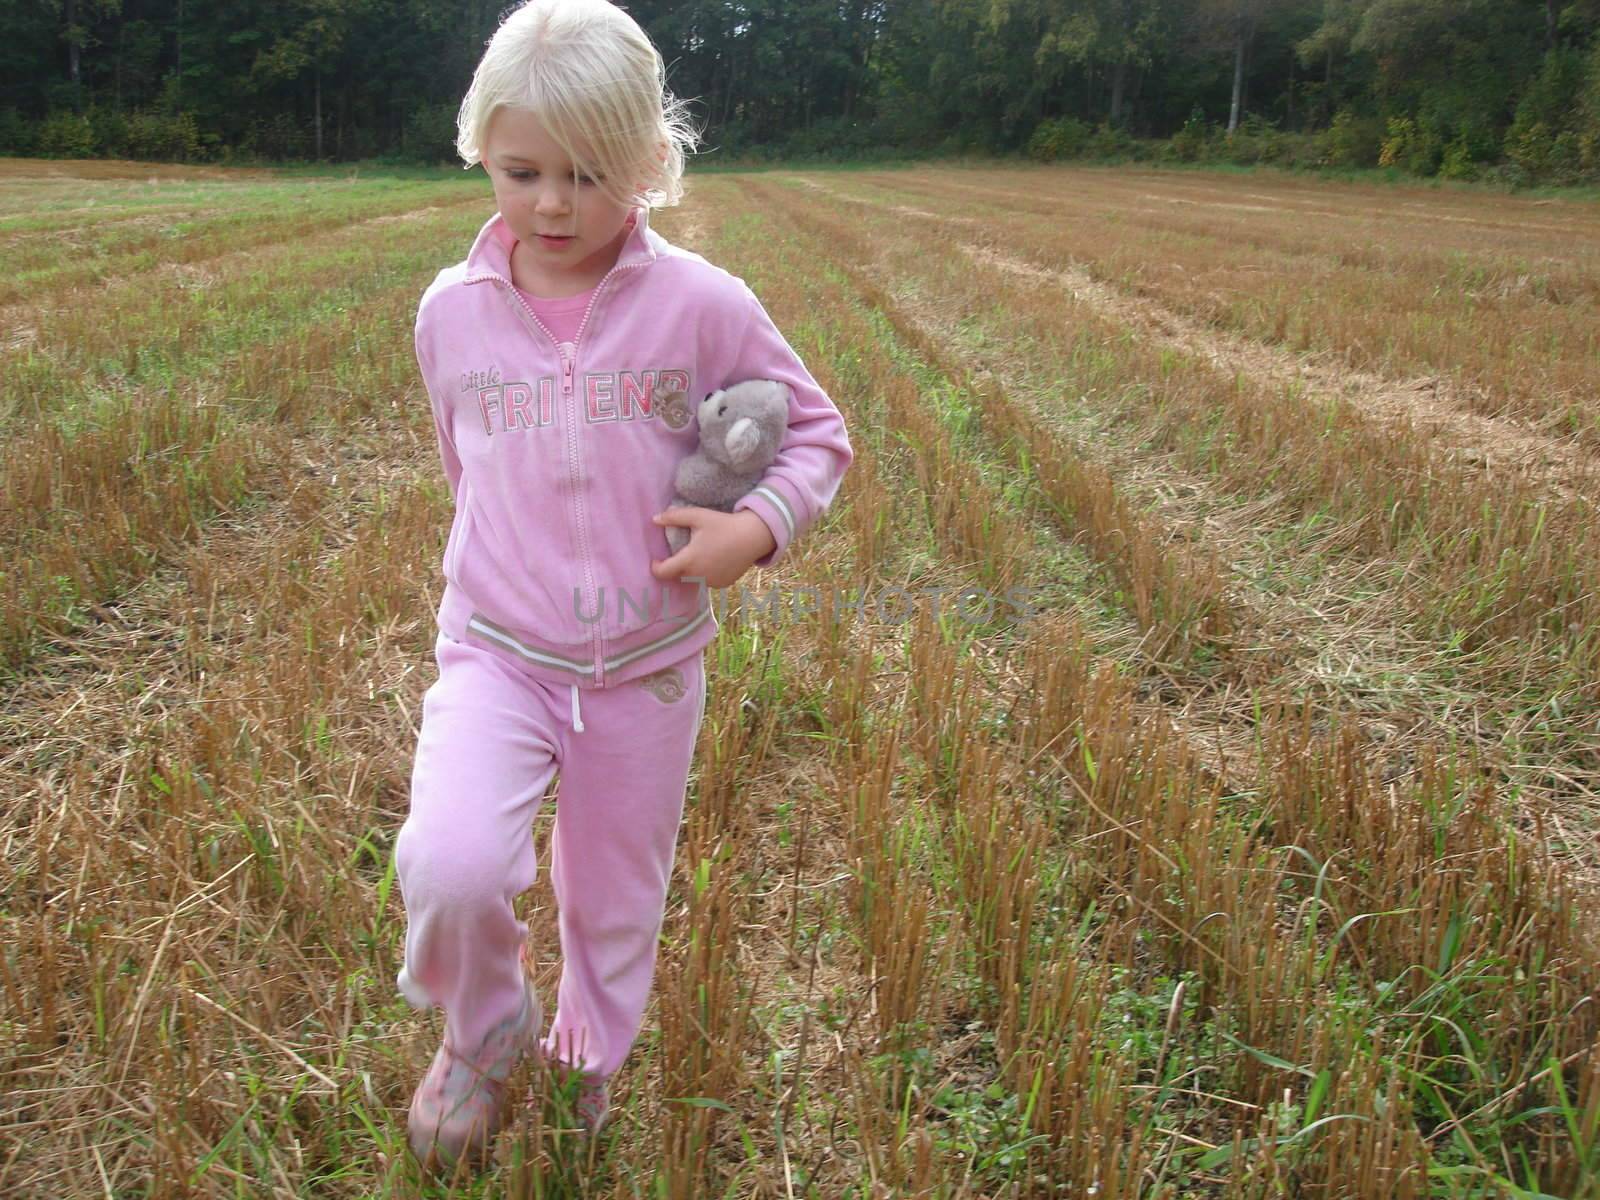 gril playing on the farm field. Please note: no negative use allowed.